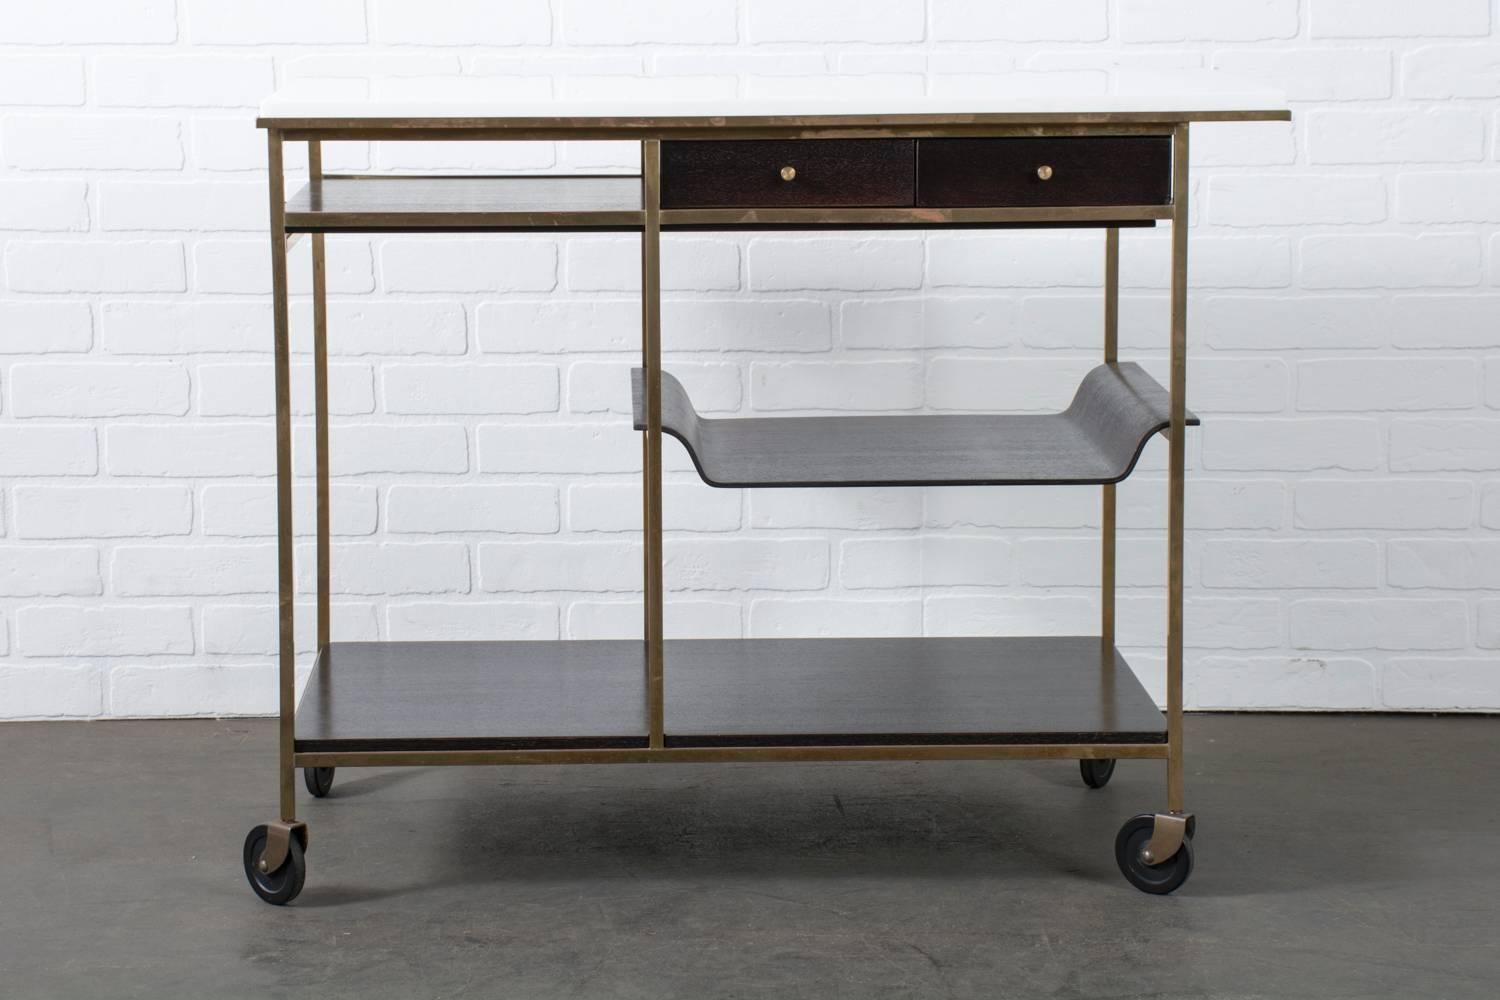 This rare Mid-Century Modern tea/bar cart was designed by Paul McCobb for the Irwin Collection by Calvin, Grand Rapids, USA, circa 1950s. It features a solid brass frame that rests on four casters; dark mahogany shelves, drawers and a removable